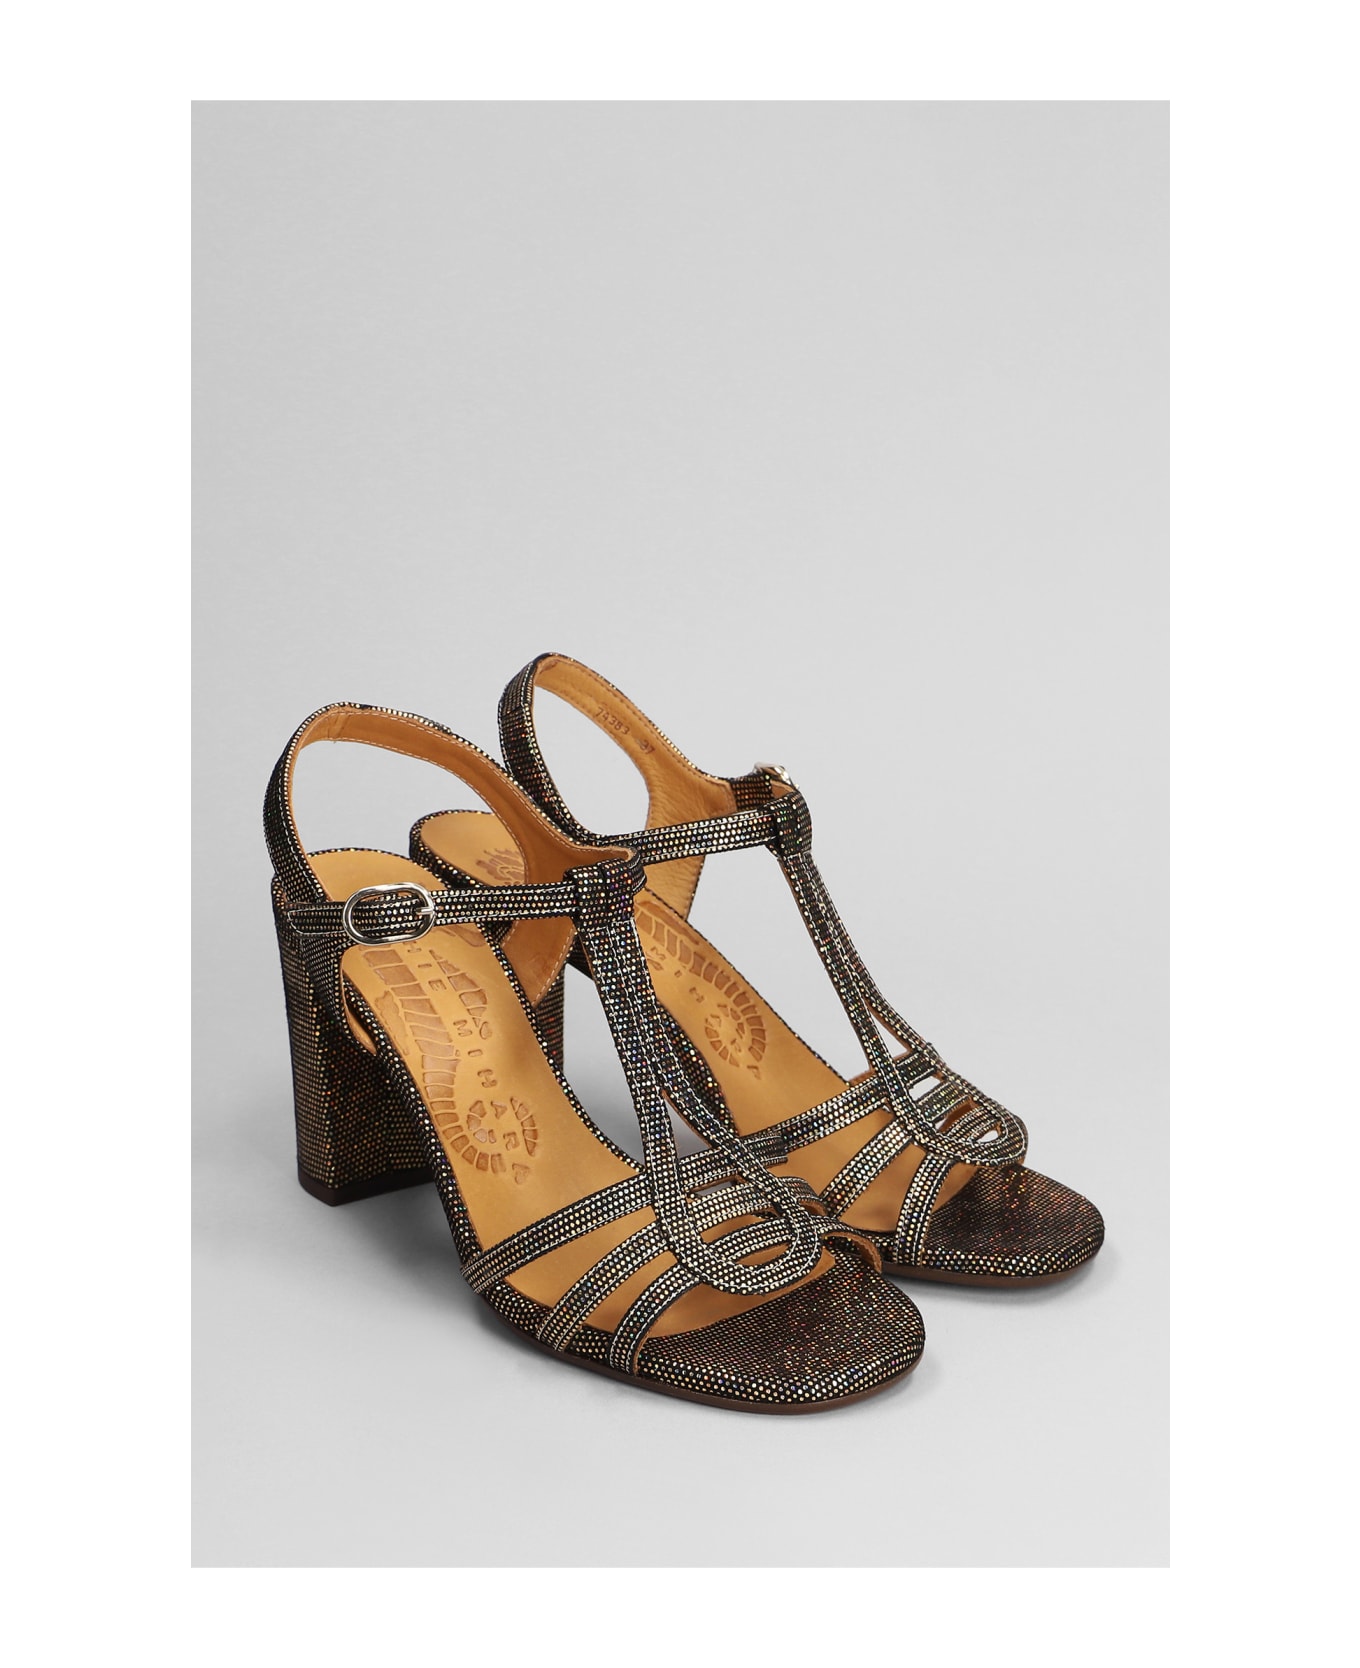 Chie Mihara Babi 44 Sandals In Gold Leather - gold